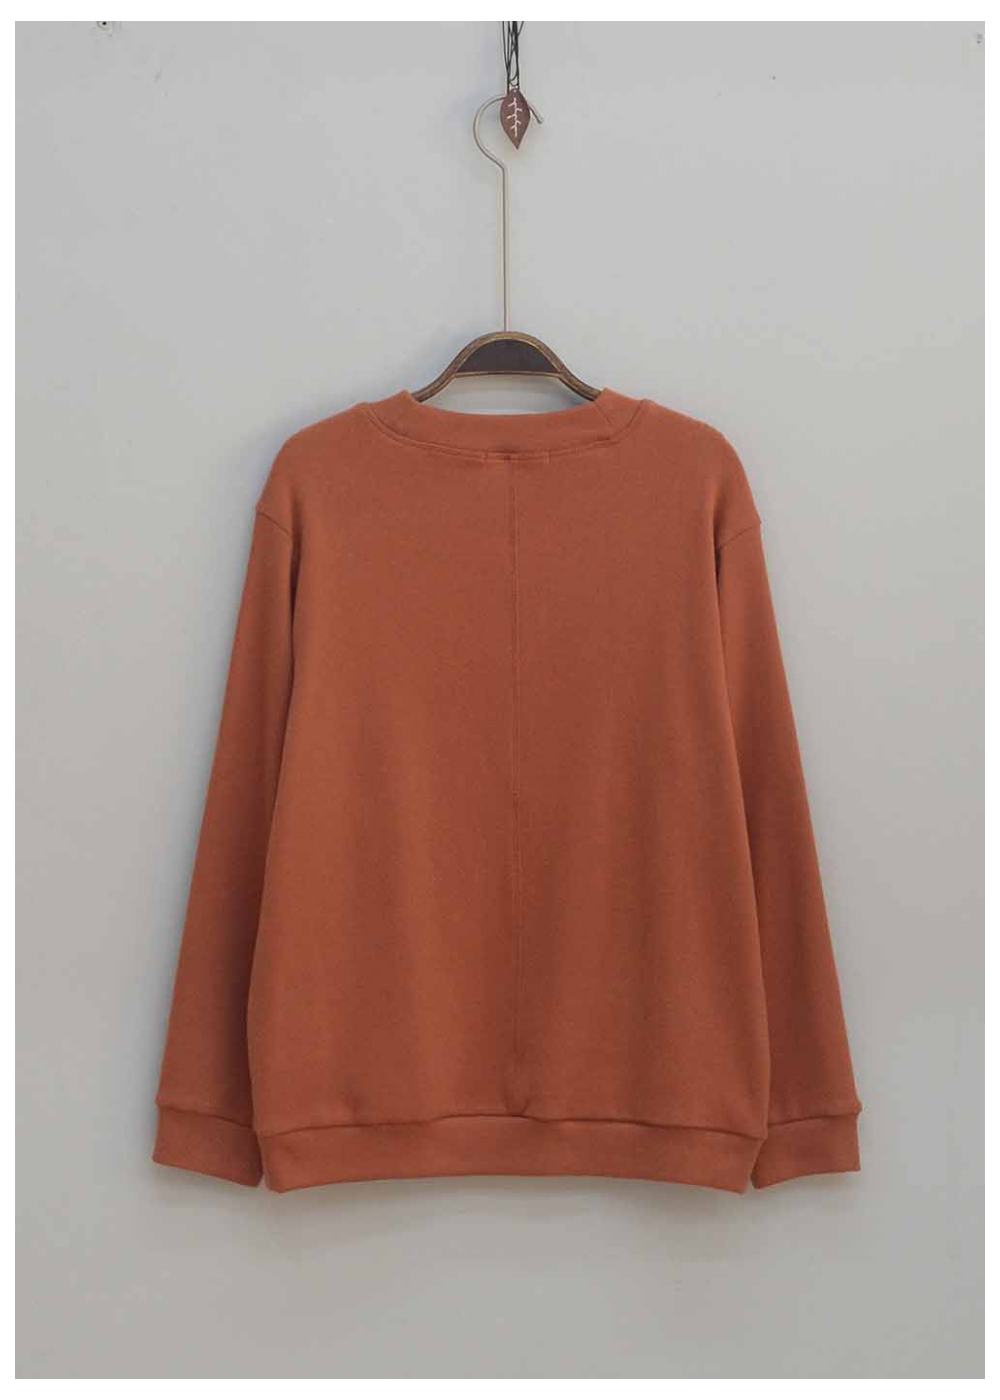 long sleeved tee brown color image-S1L67